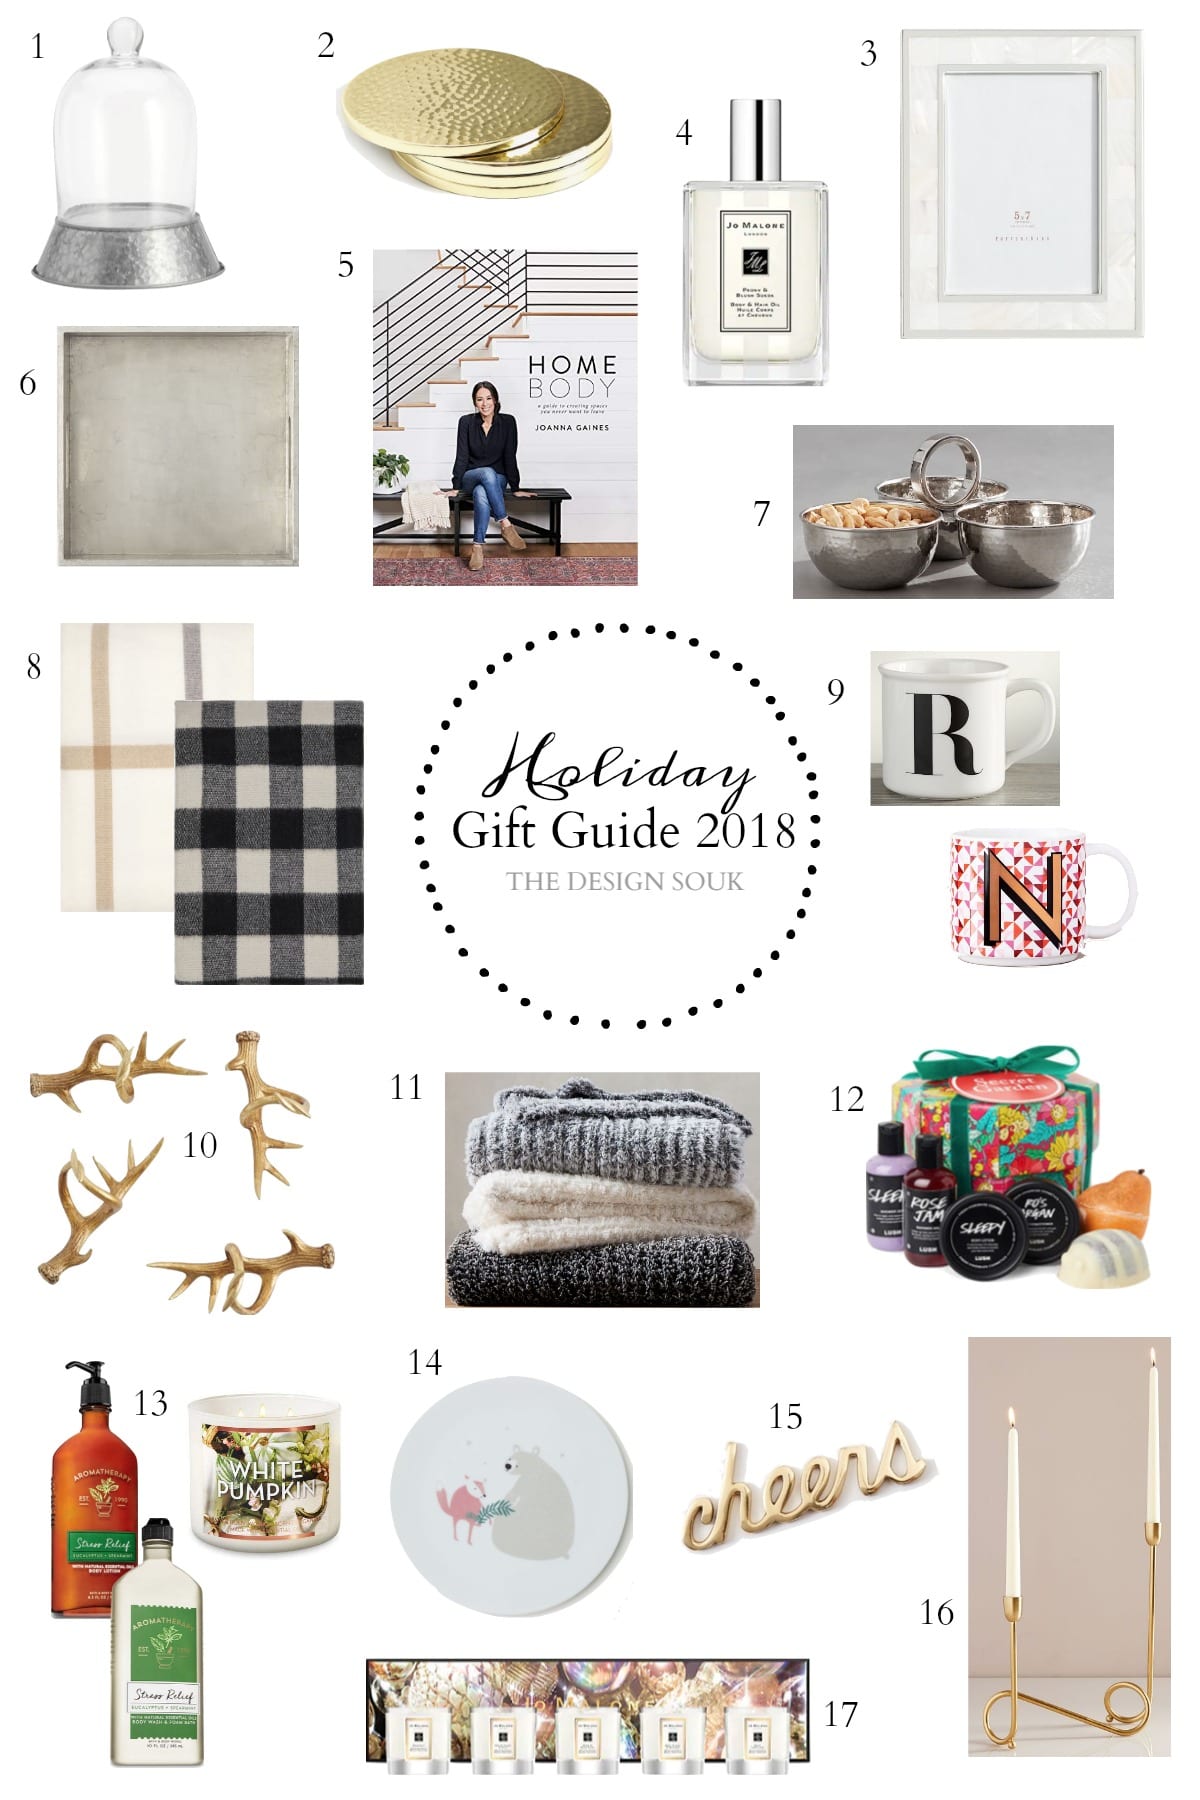 https://www.thedesignsouk.com/wp-content/uploads/2018/12/Holiday-Gift-Guide-2018.jpg